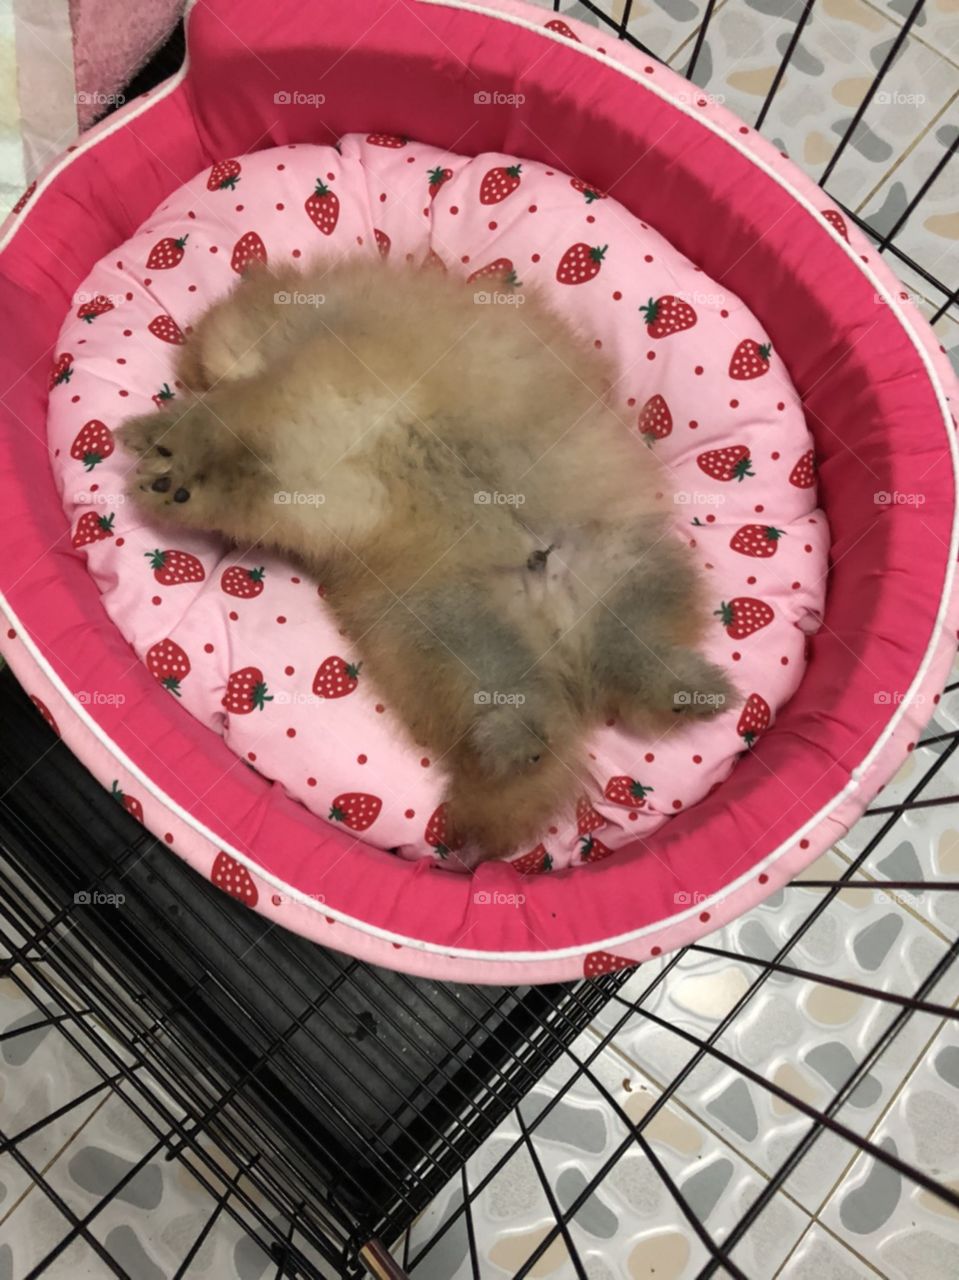 small puppy "pomeranian" is sleeping on his bed by lieing on his back.